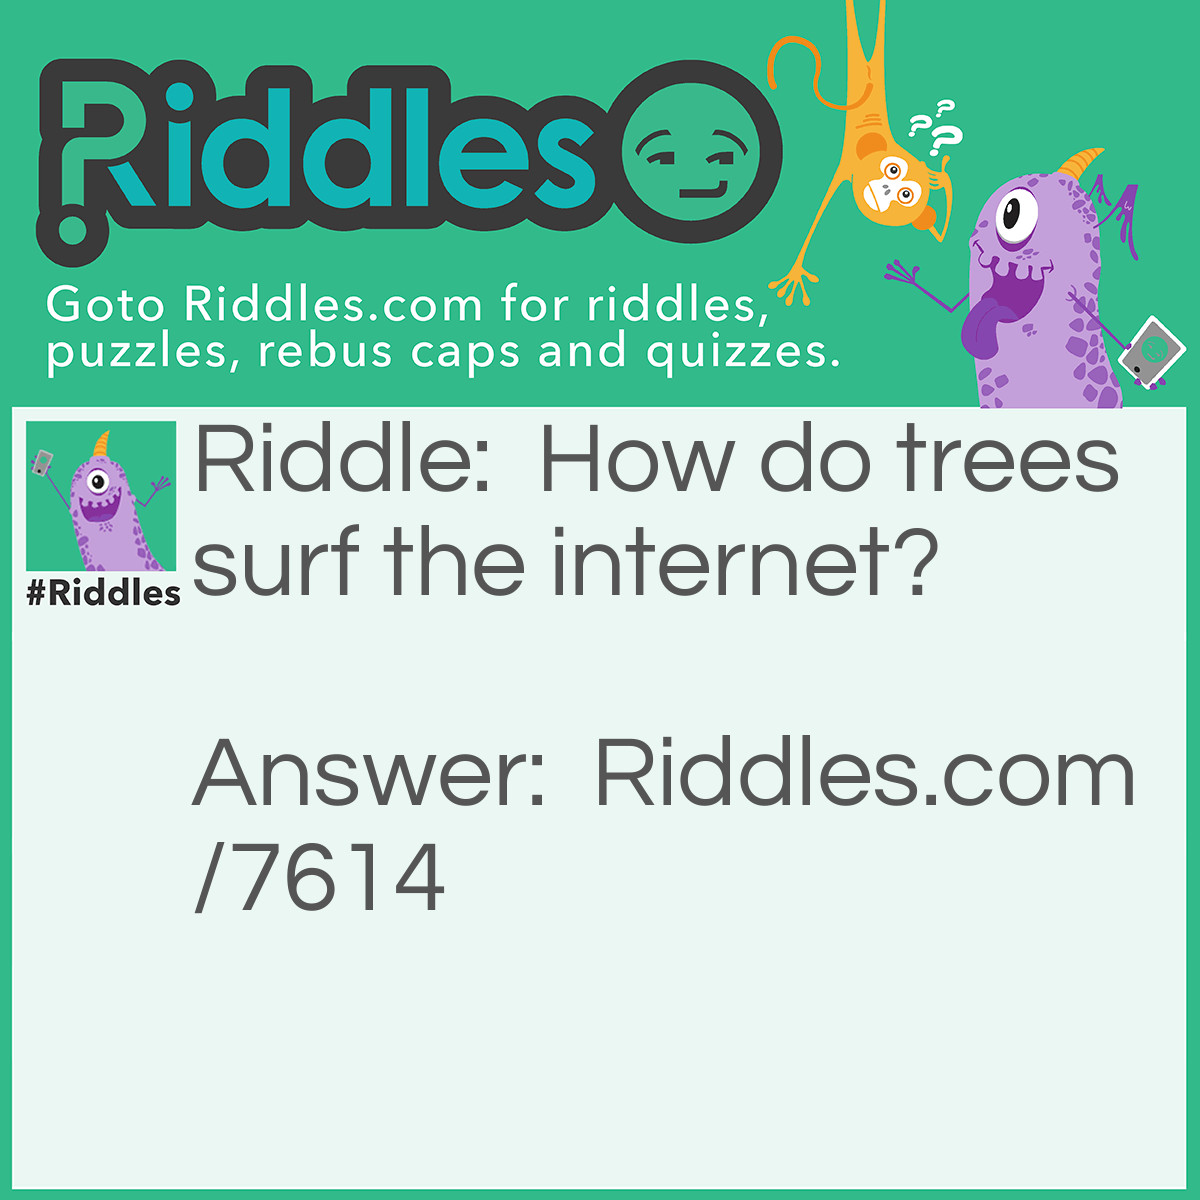 Riddle: How do trees surf the internet? Answer: They Log in!